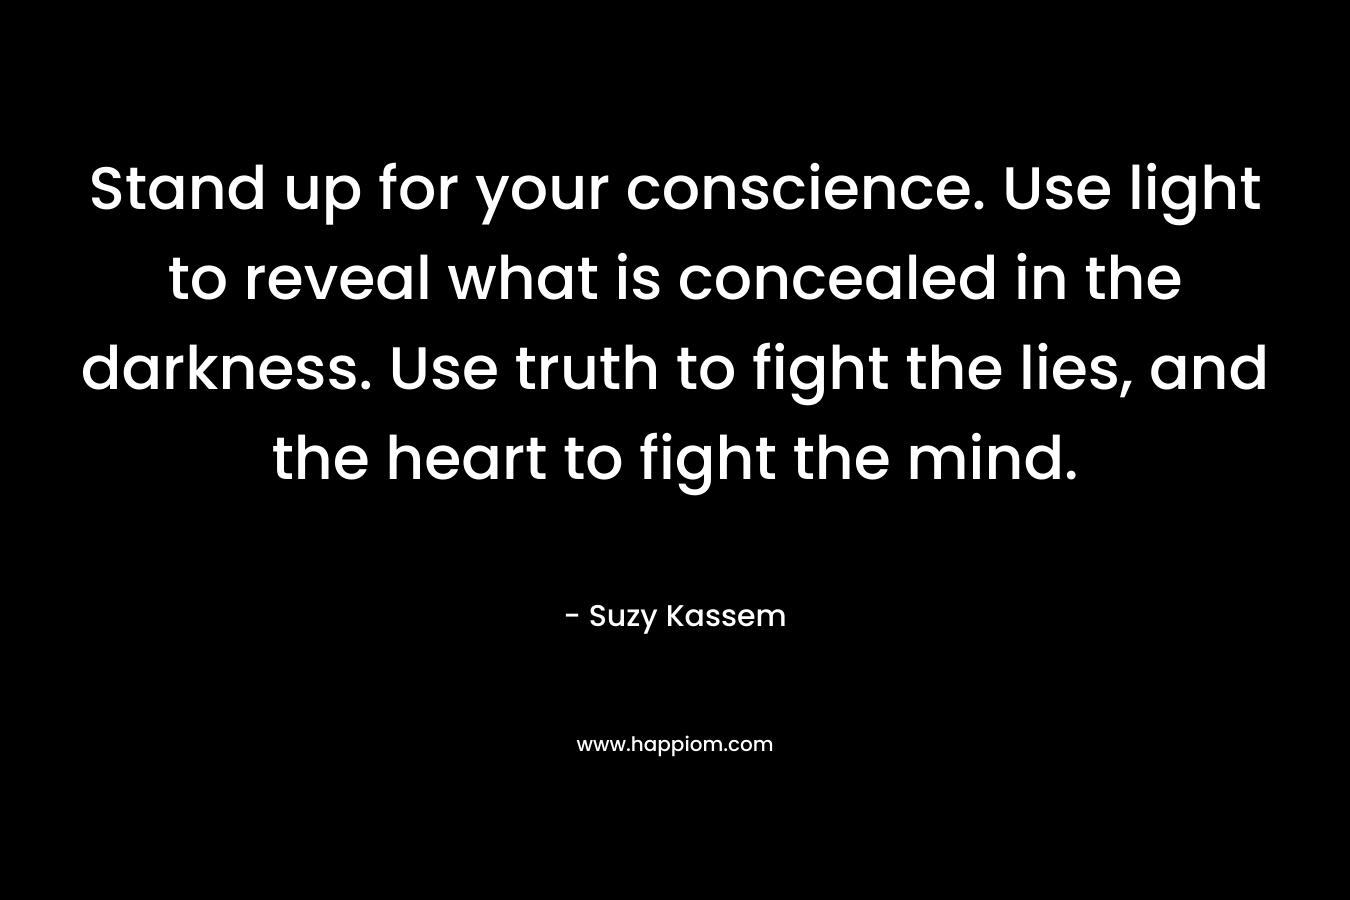 Stand up for your conscience. Use light to reveal what is concealed in the darkness. Use truth to fight the lies, and the heart to fight the mind.